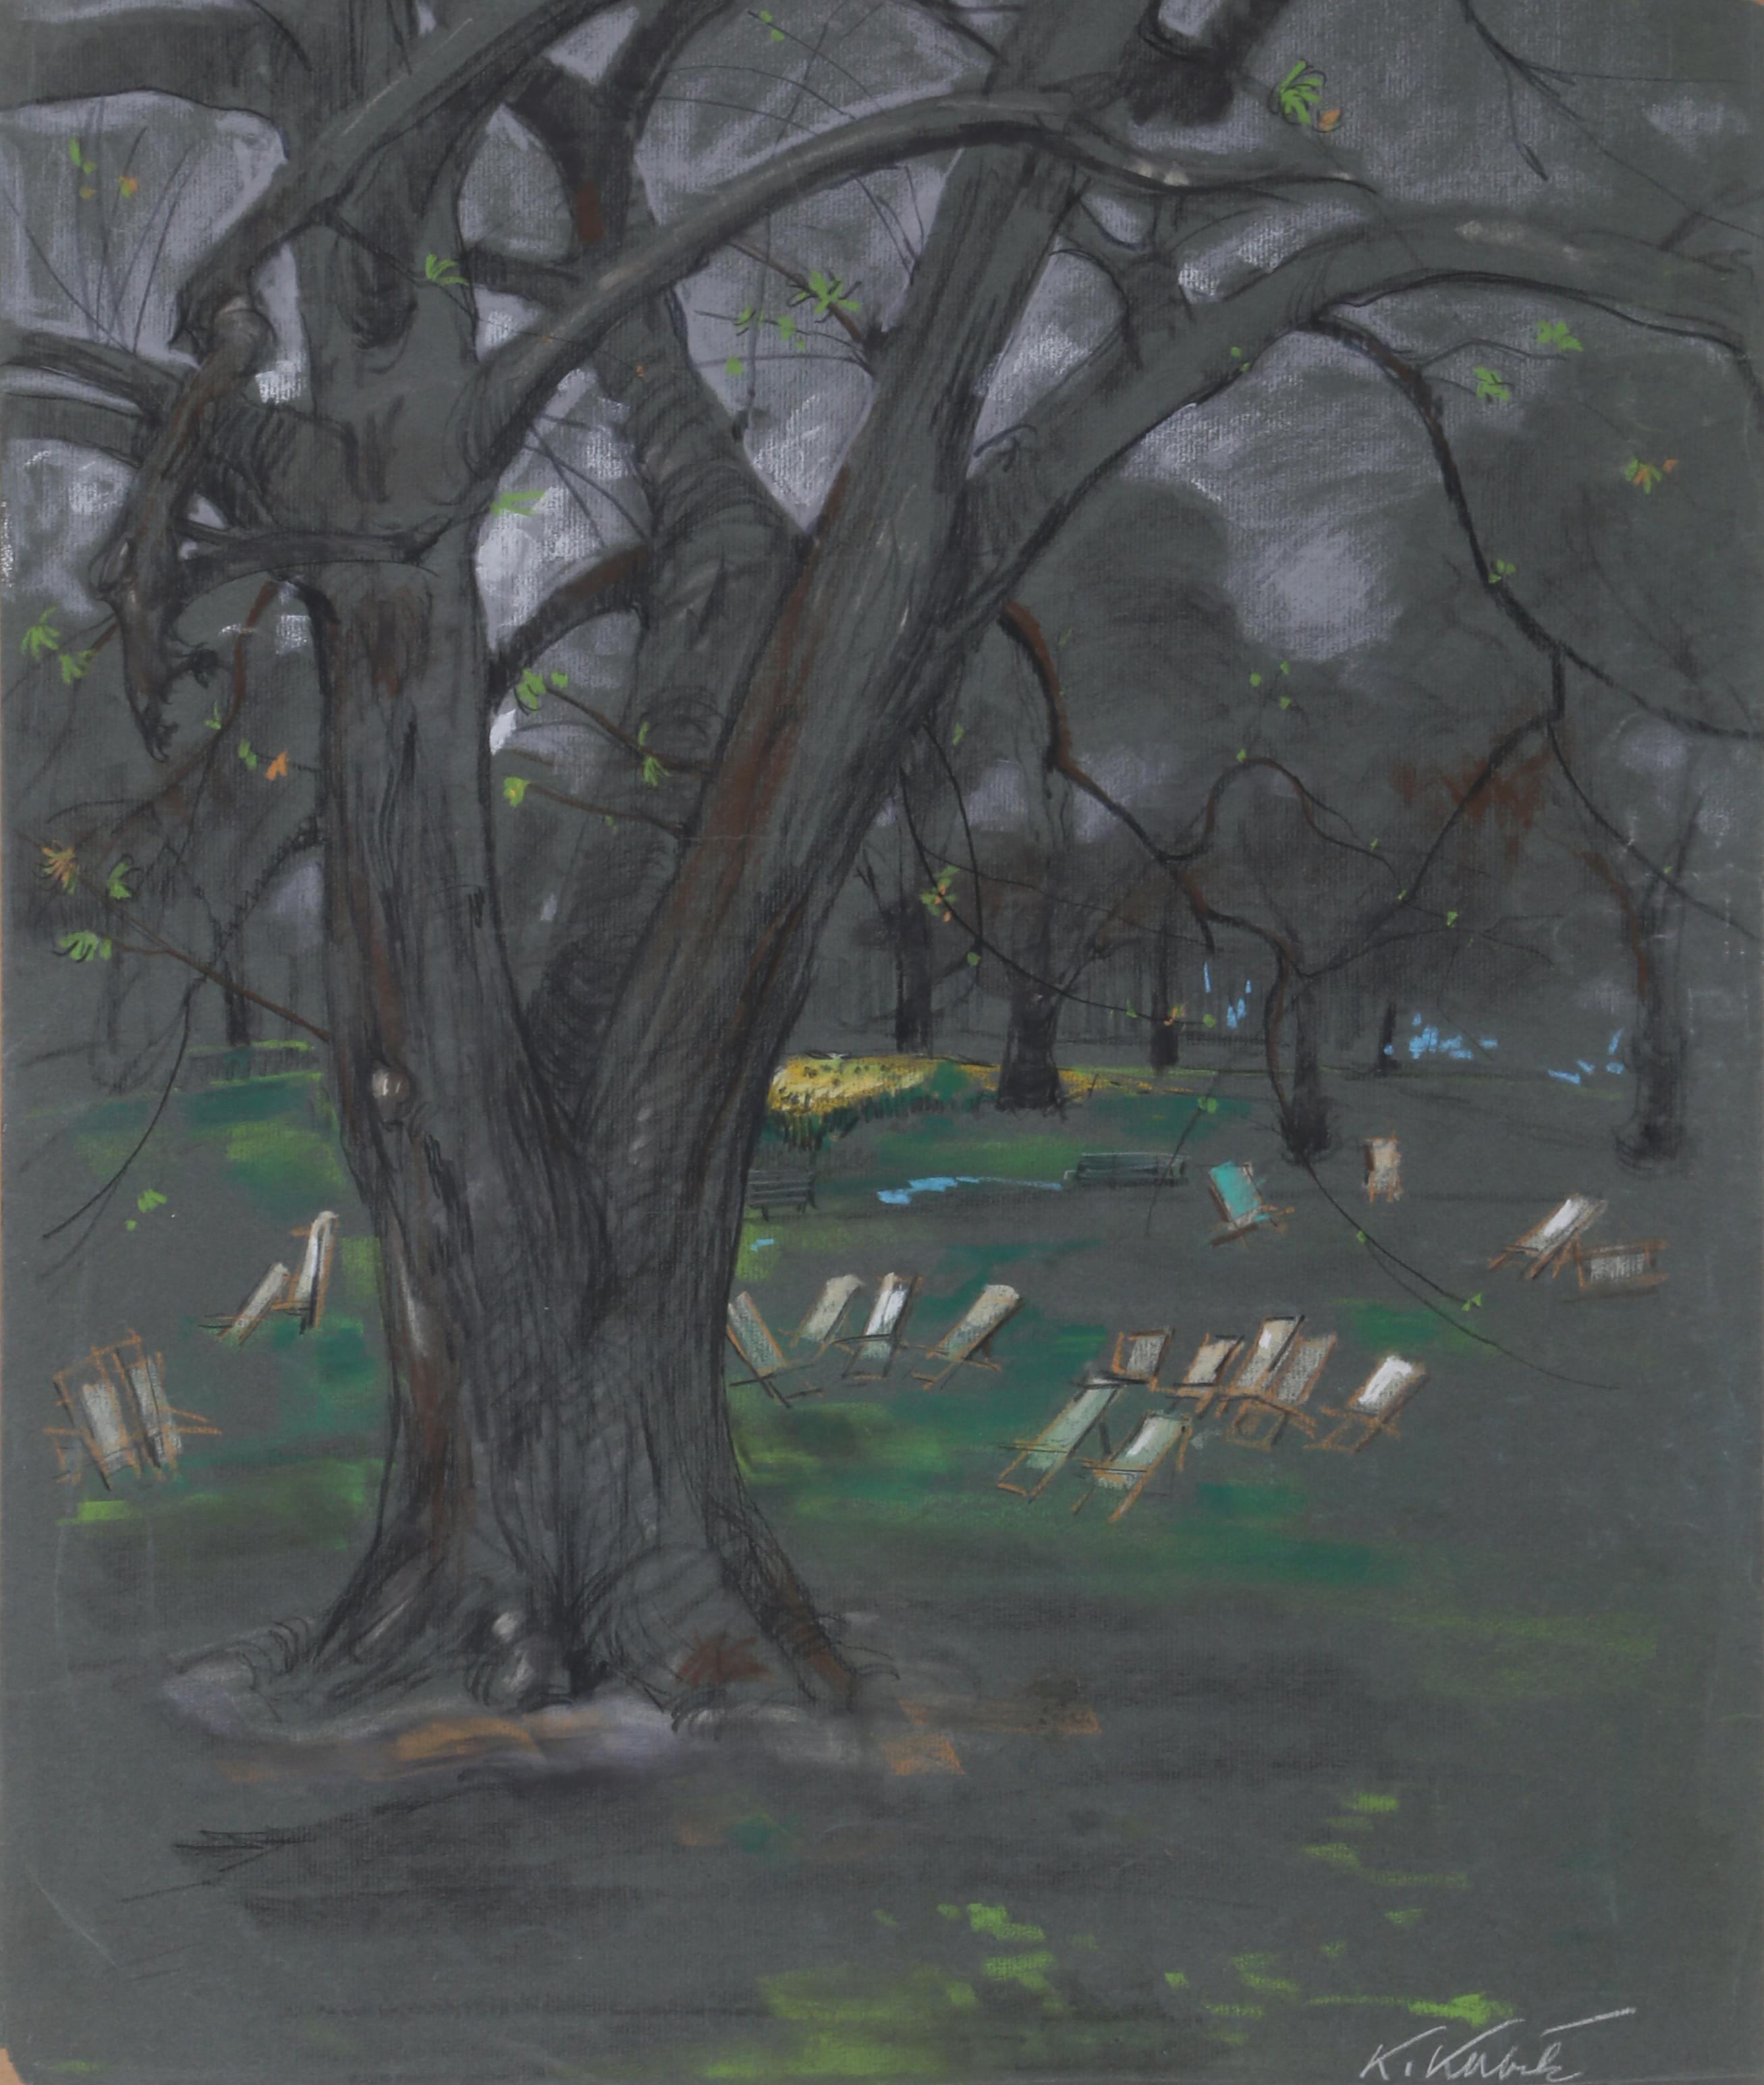 Chairs in the Park by Kamil Kubik, Czech/American (1930–2011)
Pastel on Paper, signed l.r.
Size: 19.5 x 25.5 in. (49.53 x 64.77 cm)